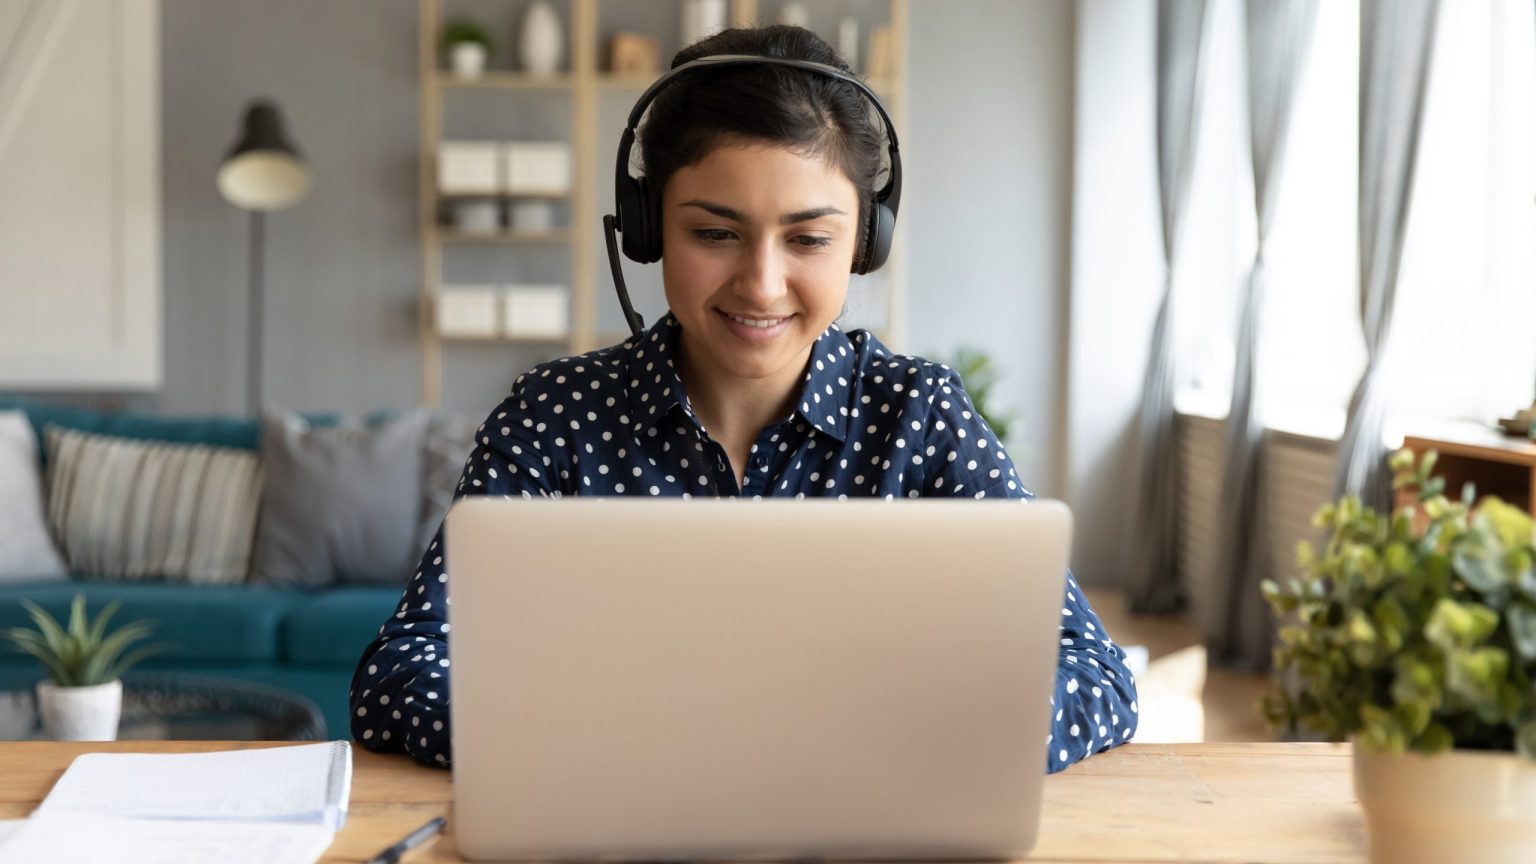 Woman with headphones on working at home on a laptop at a desk.